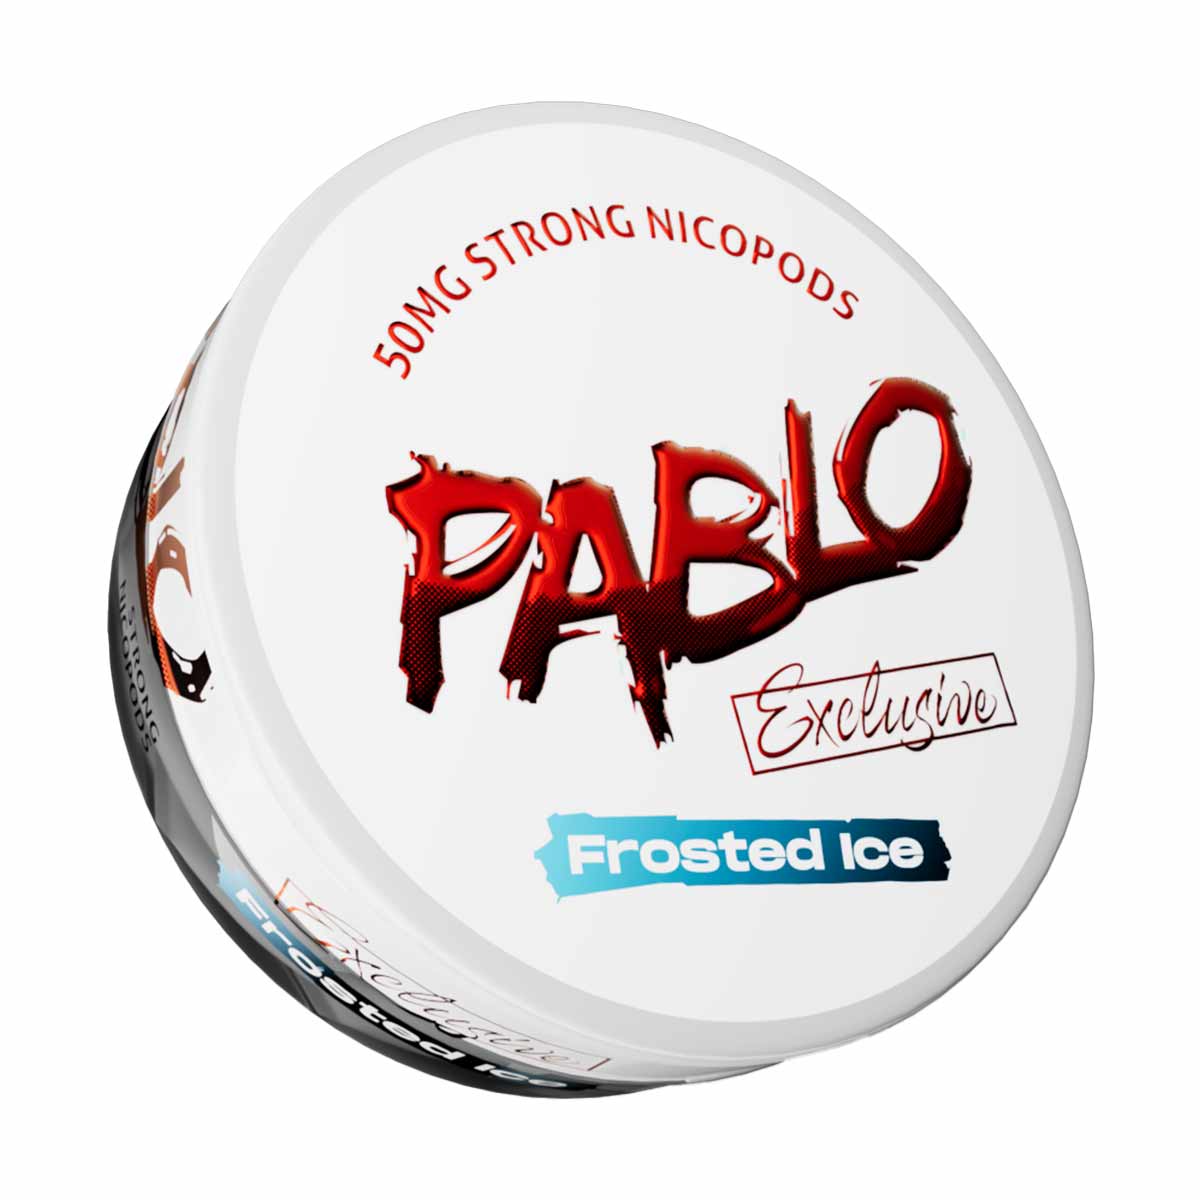 Frosted Ice Pablo Nicotine Snus Pouches